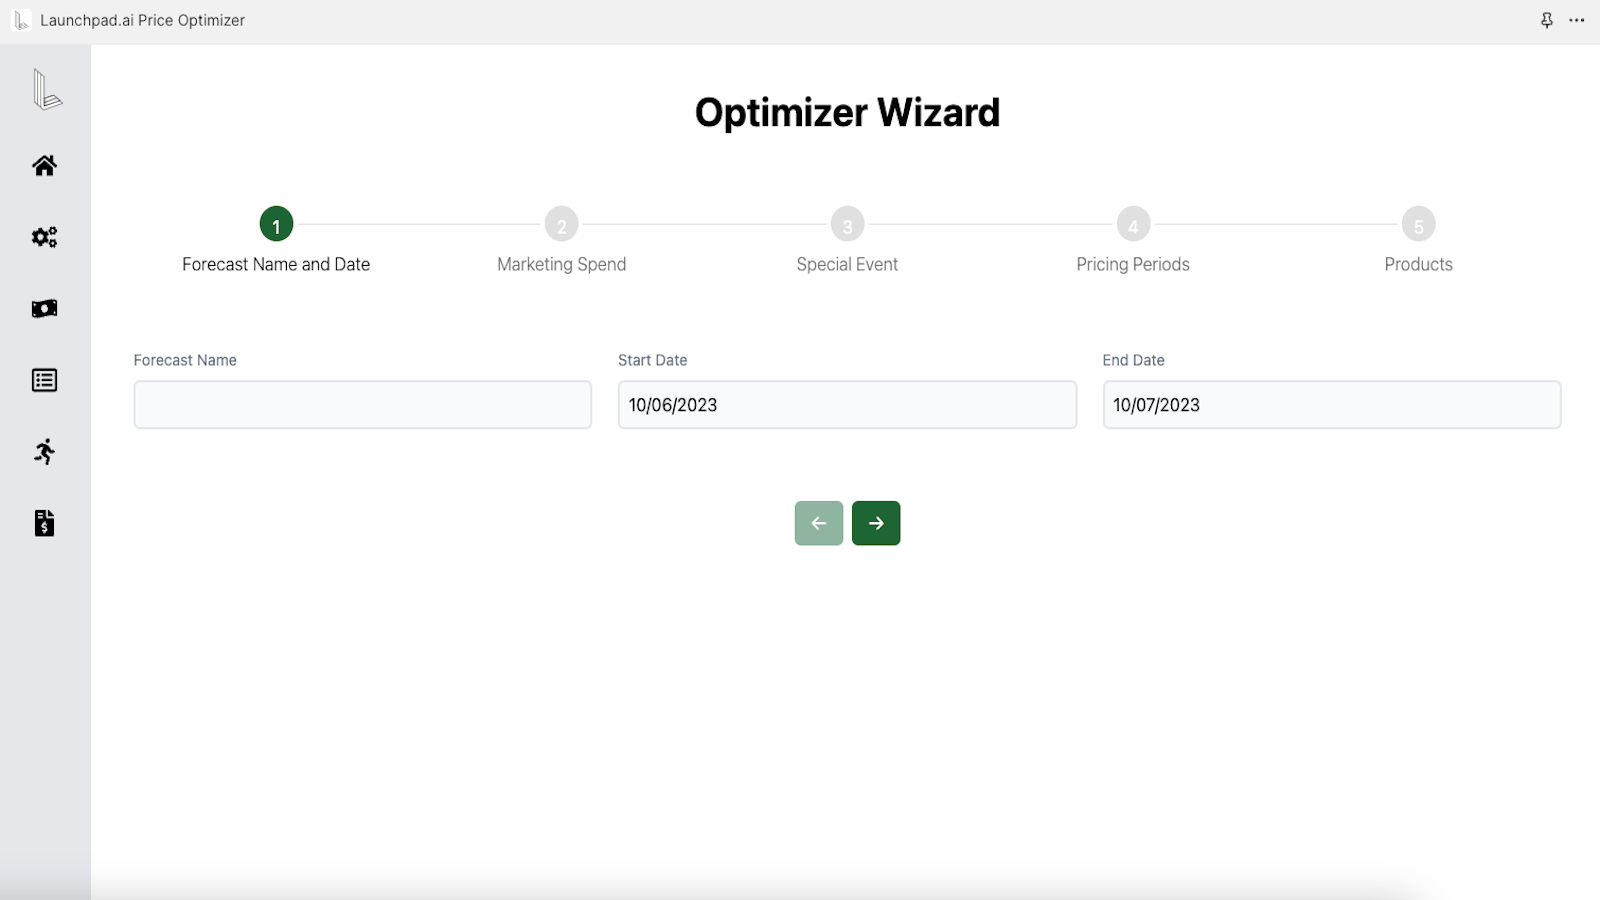 The Optimizer Wizard will guide you through the process